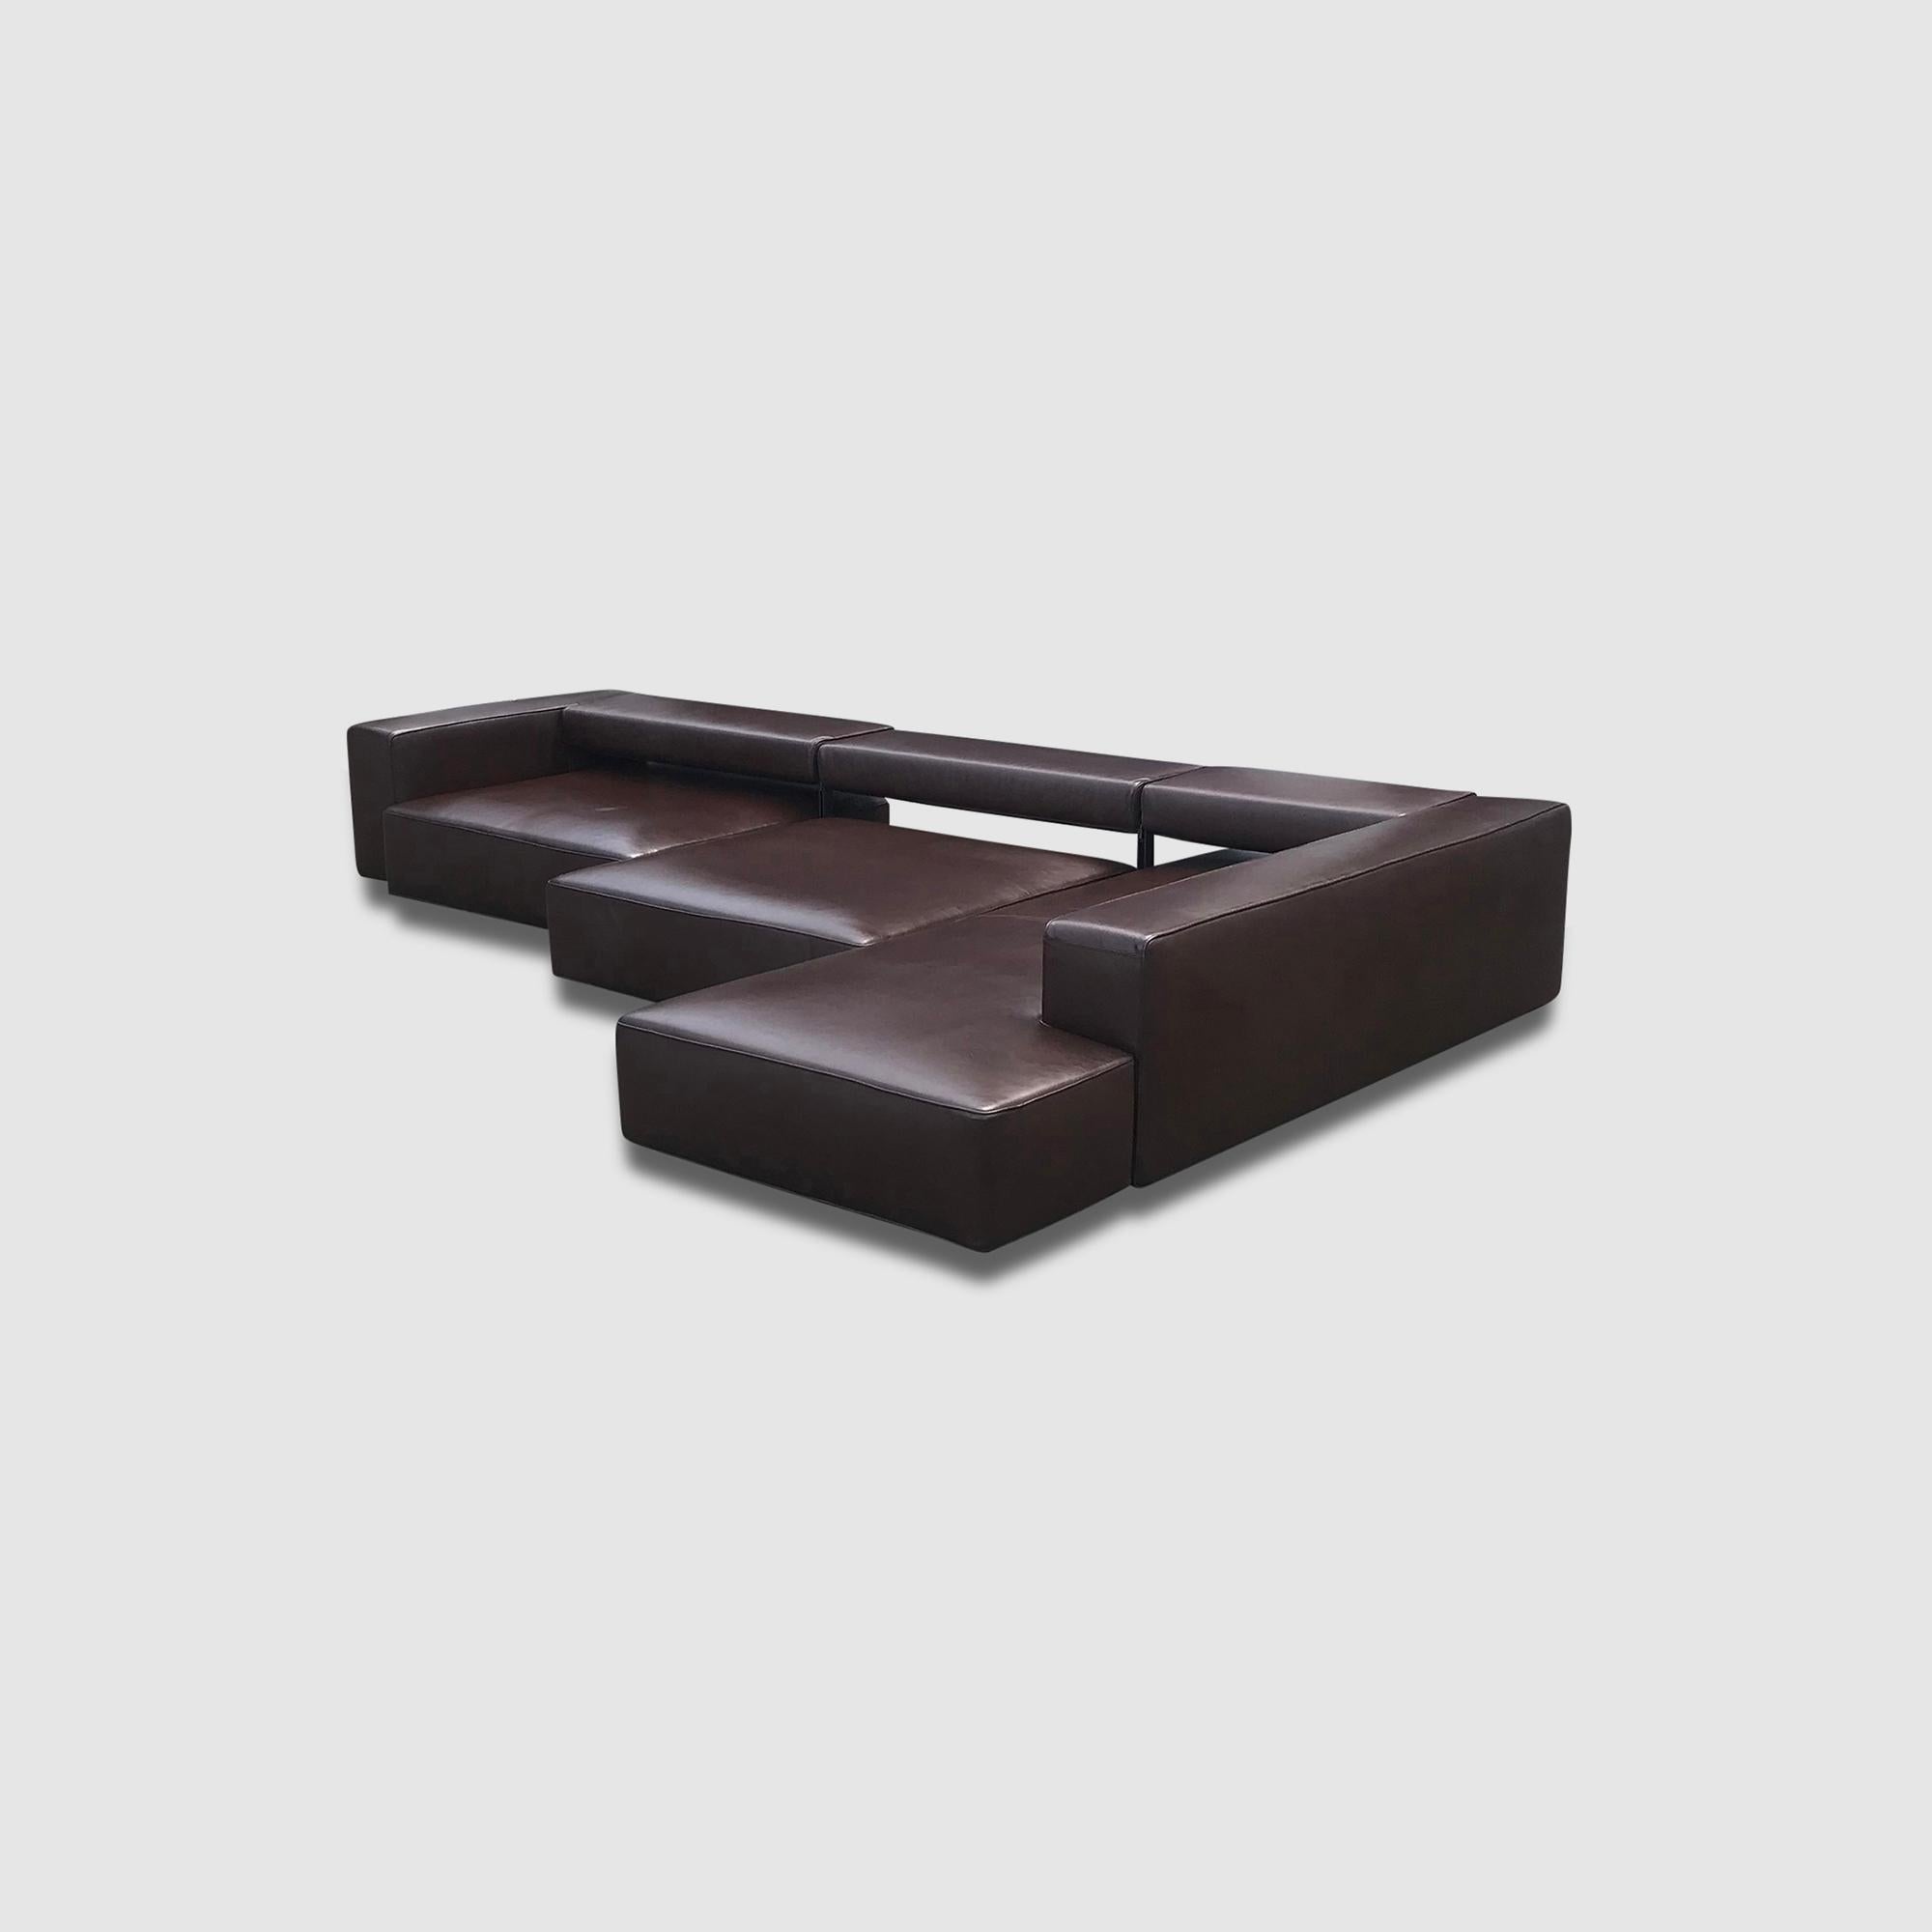 Modular Leather Andy Landscape Sofa by Paolo Piva for B&B Italia 2013 10